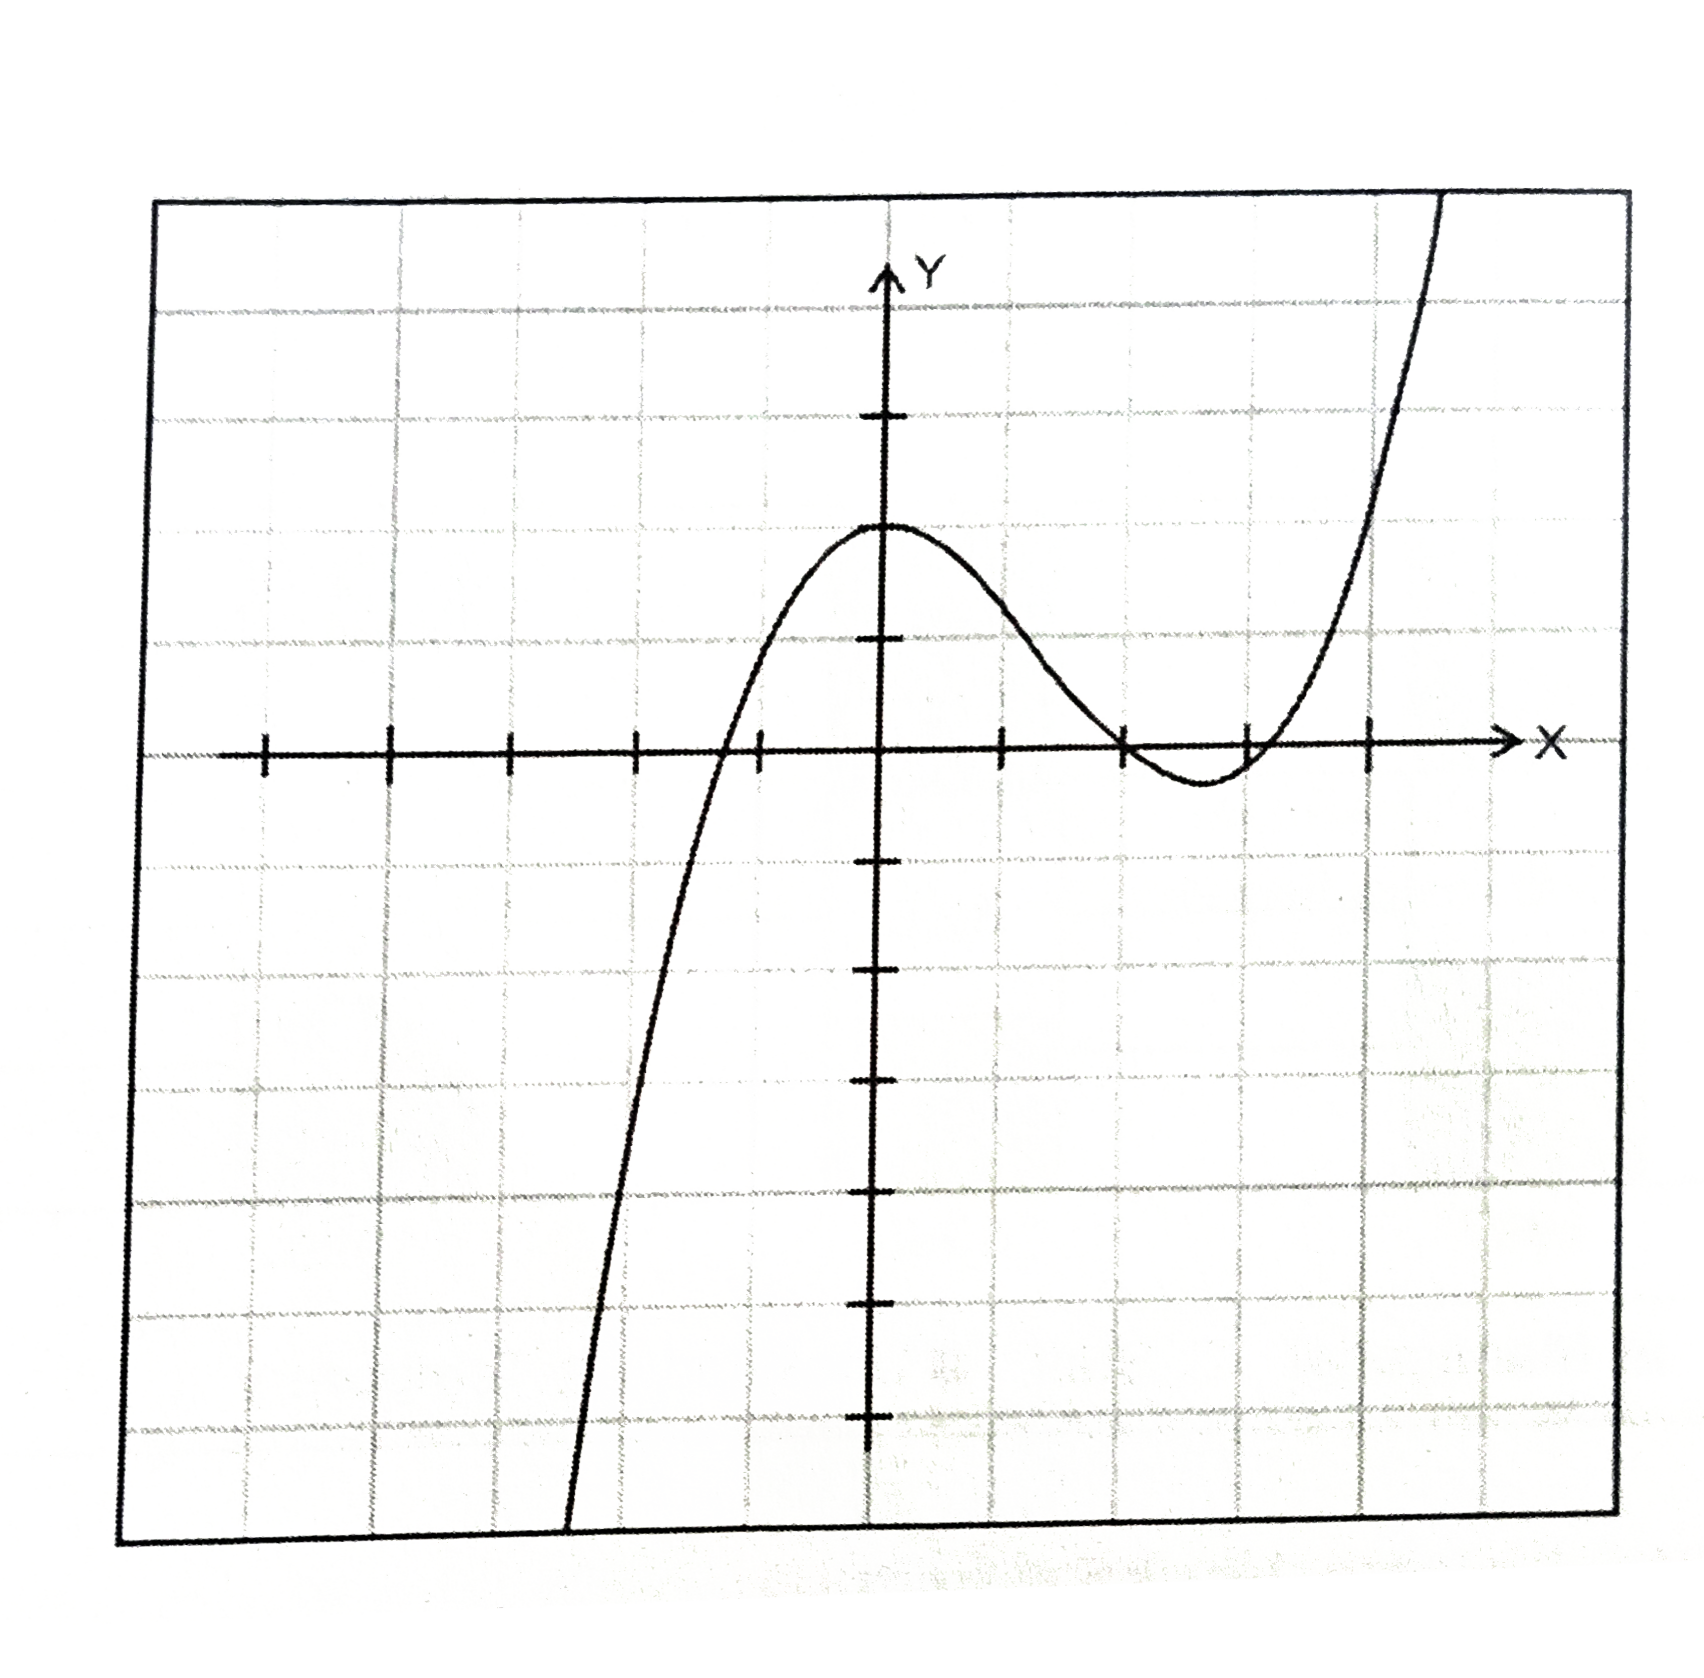 Which  of the following  could be  the equation of the graph shown above ?